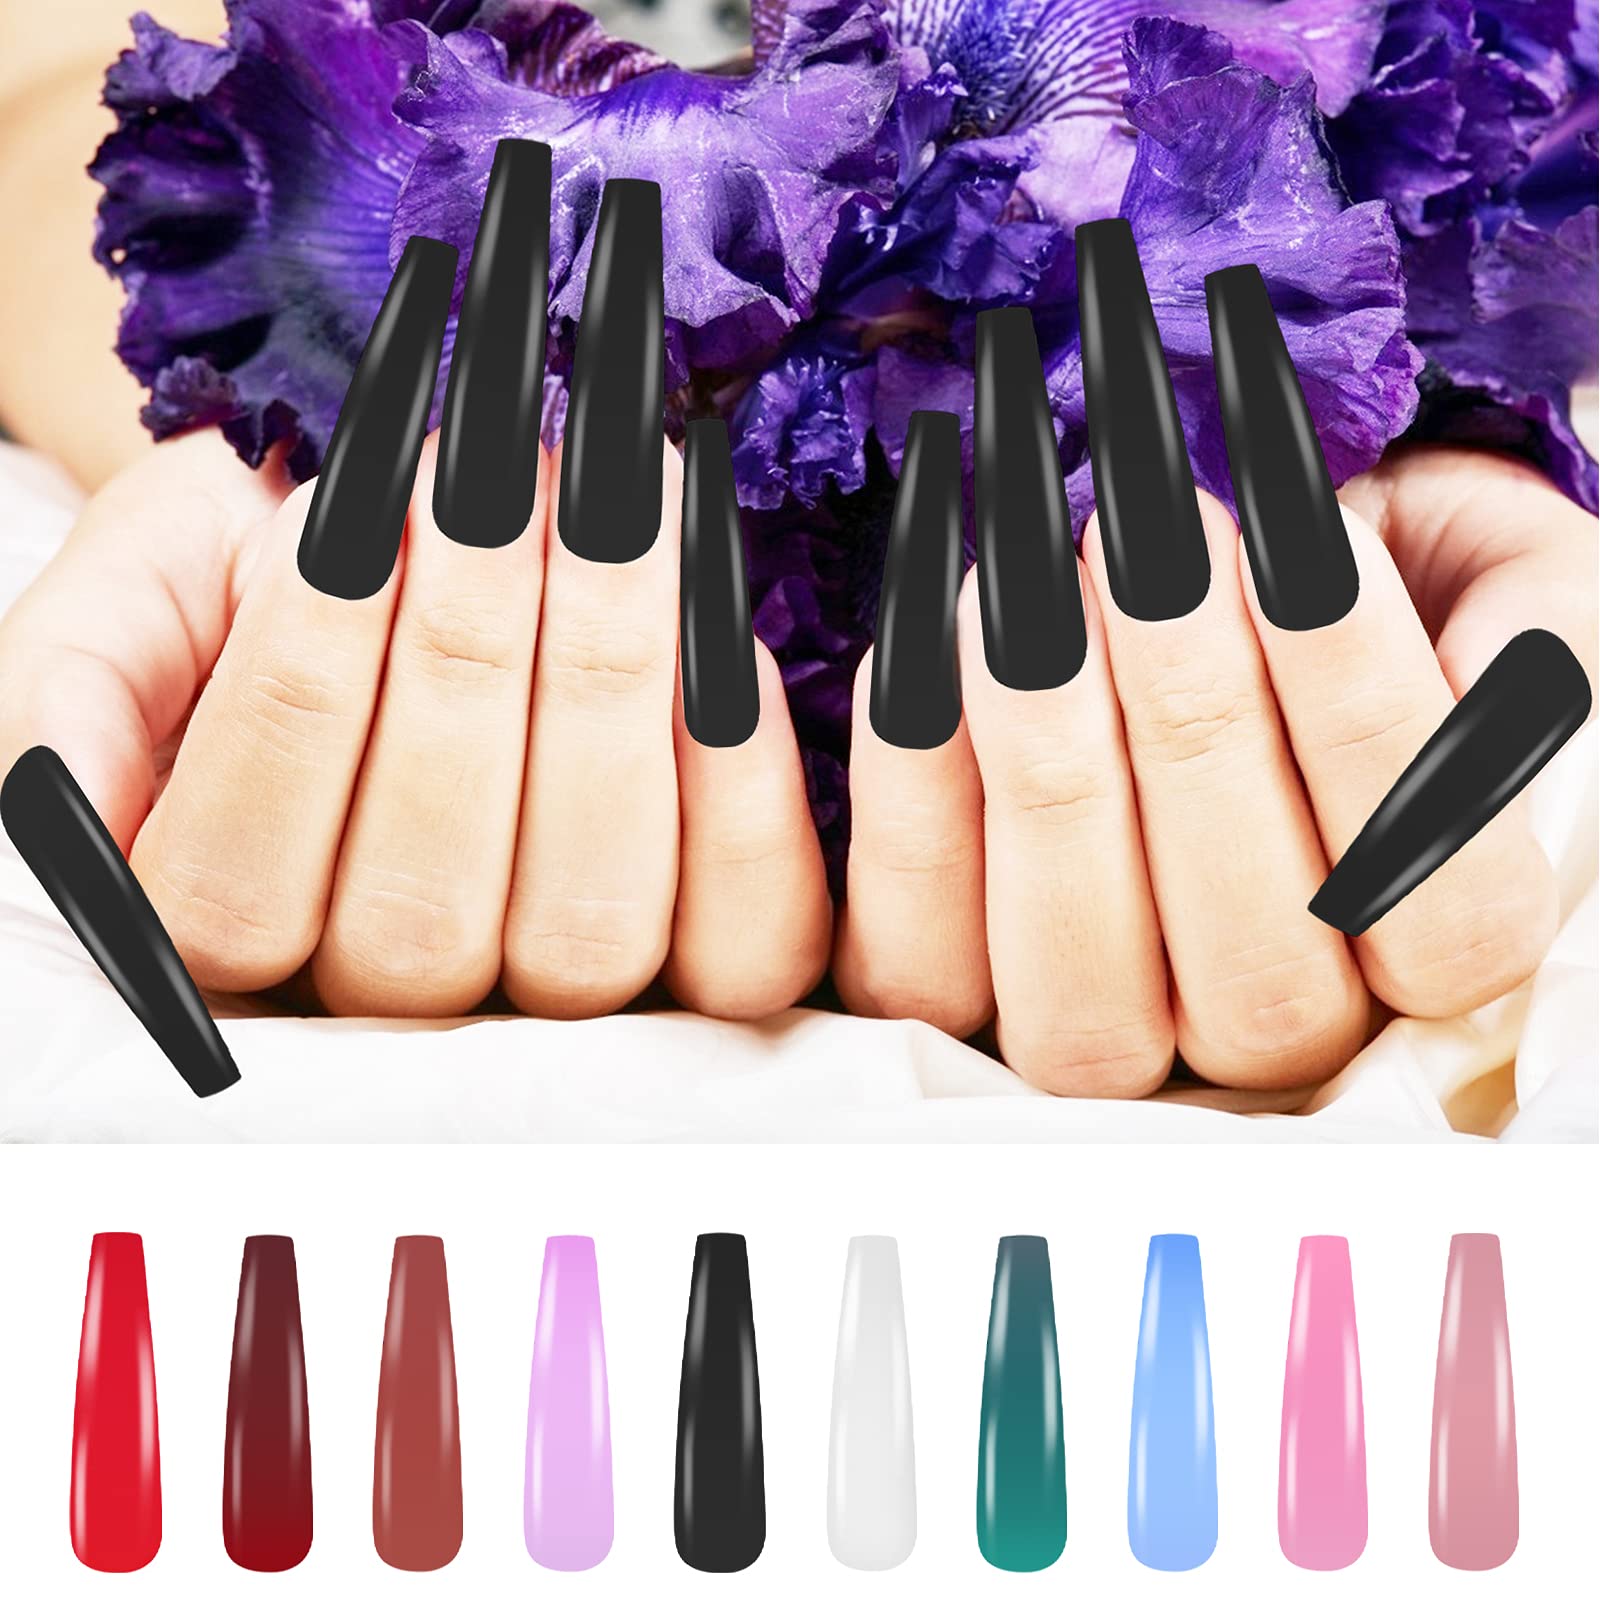 Solid Color Long Coffin Grey Acrylic Nails Coffin Matte Full Cover Press On  Nail Art Tips For Manicure MS01 10 From Dadabibi, $6.26 | DHgate.Com